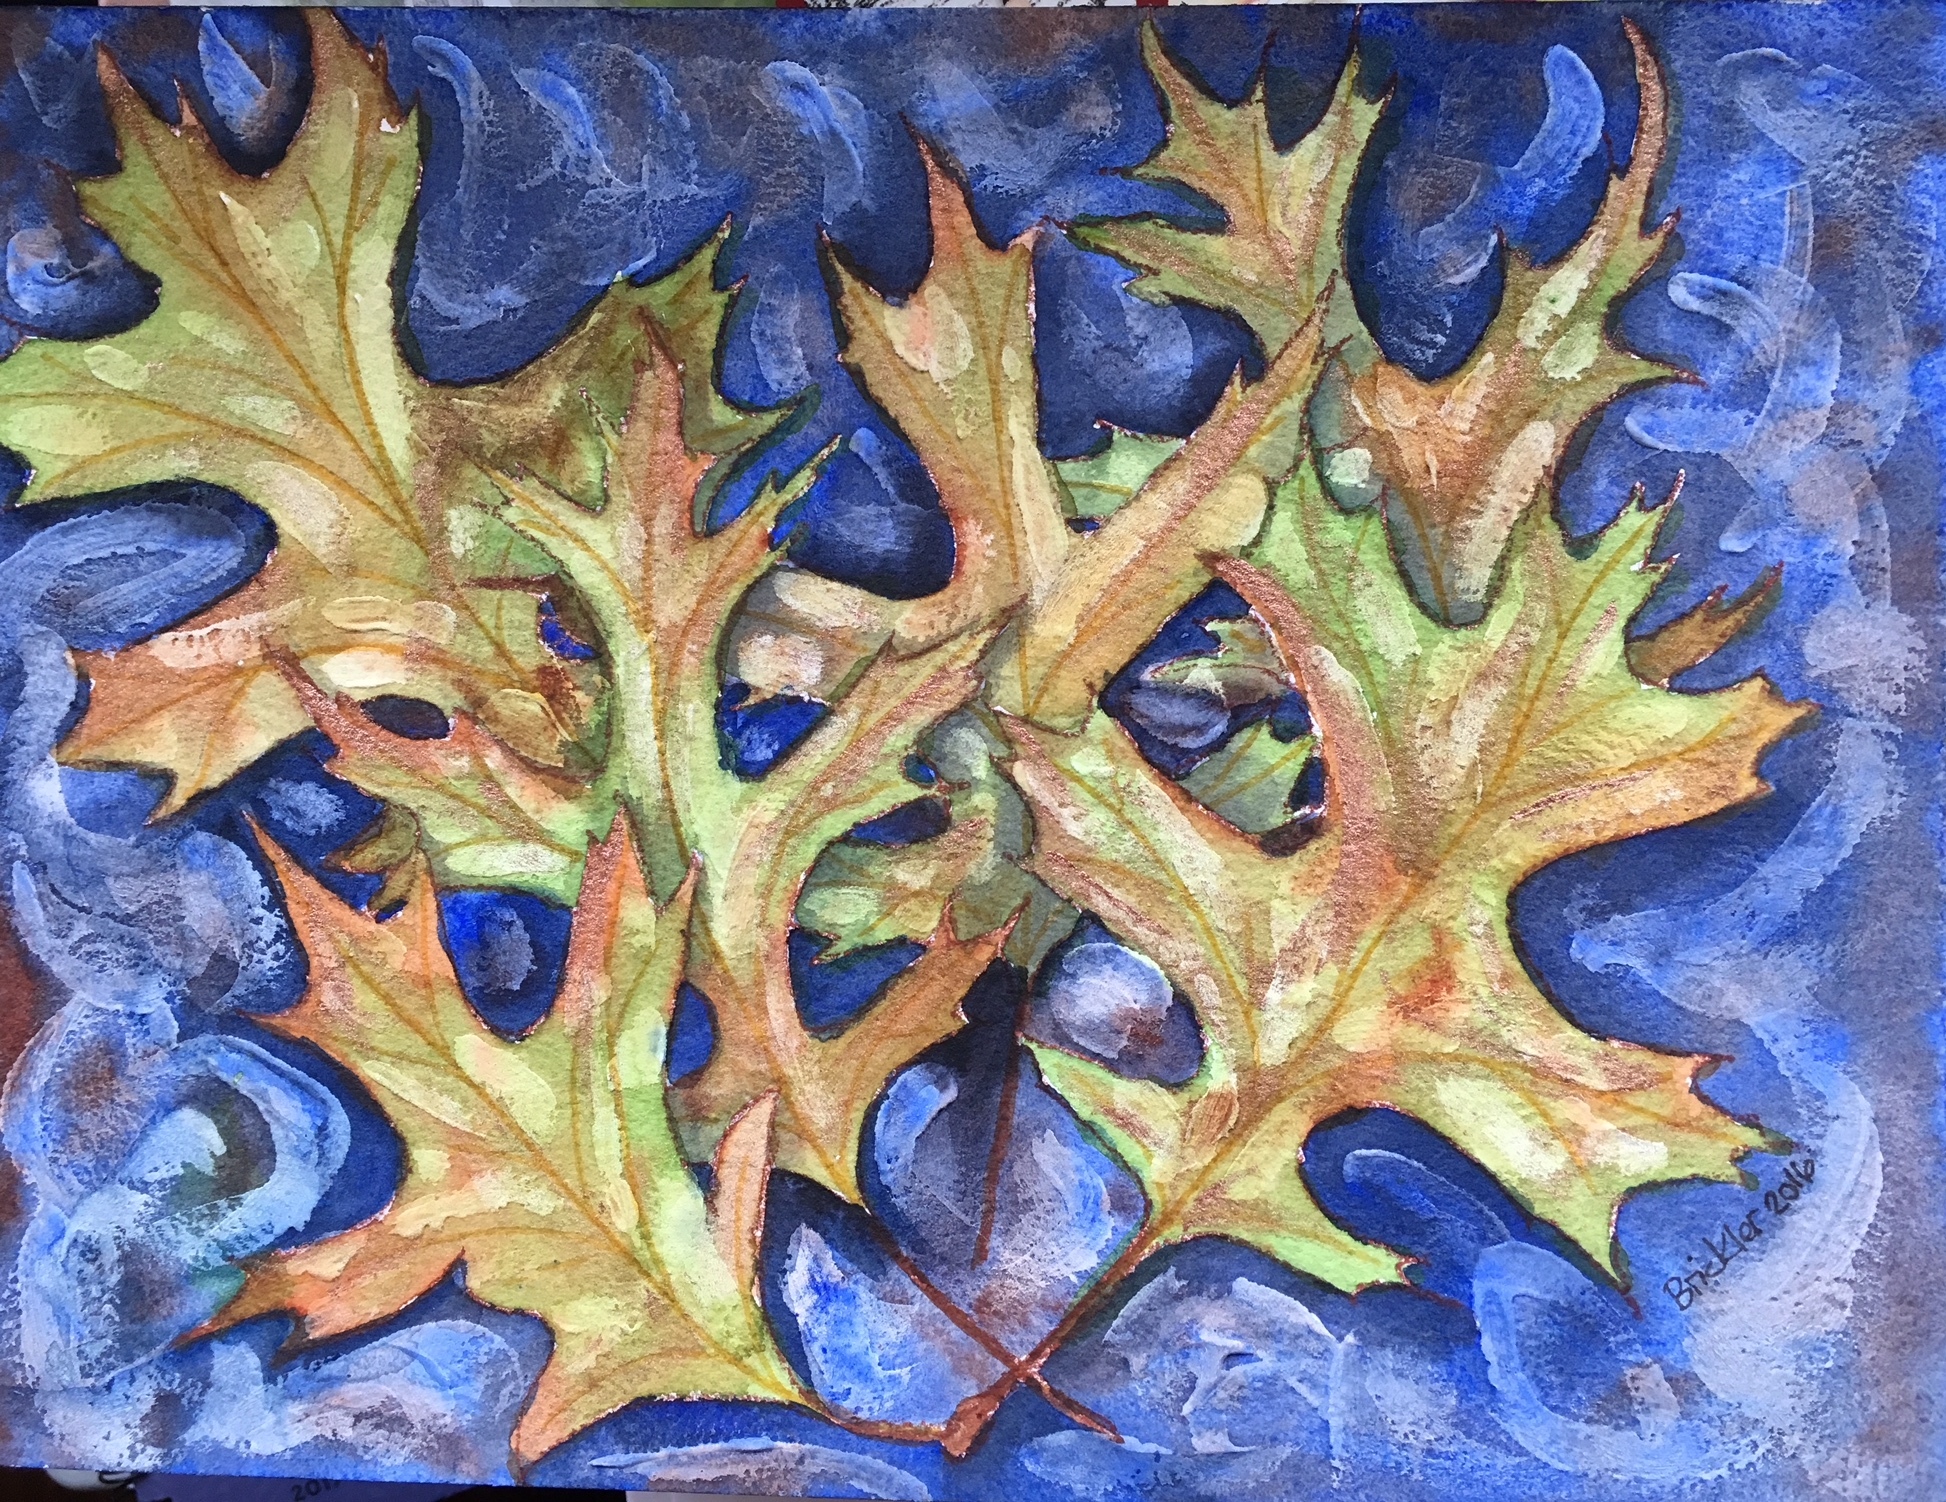 “Fall Leaves”, color pencil, watercolor, metallic watercolor, acrylic marker and absorbent watercolor ground